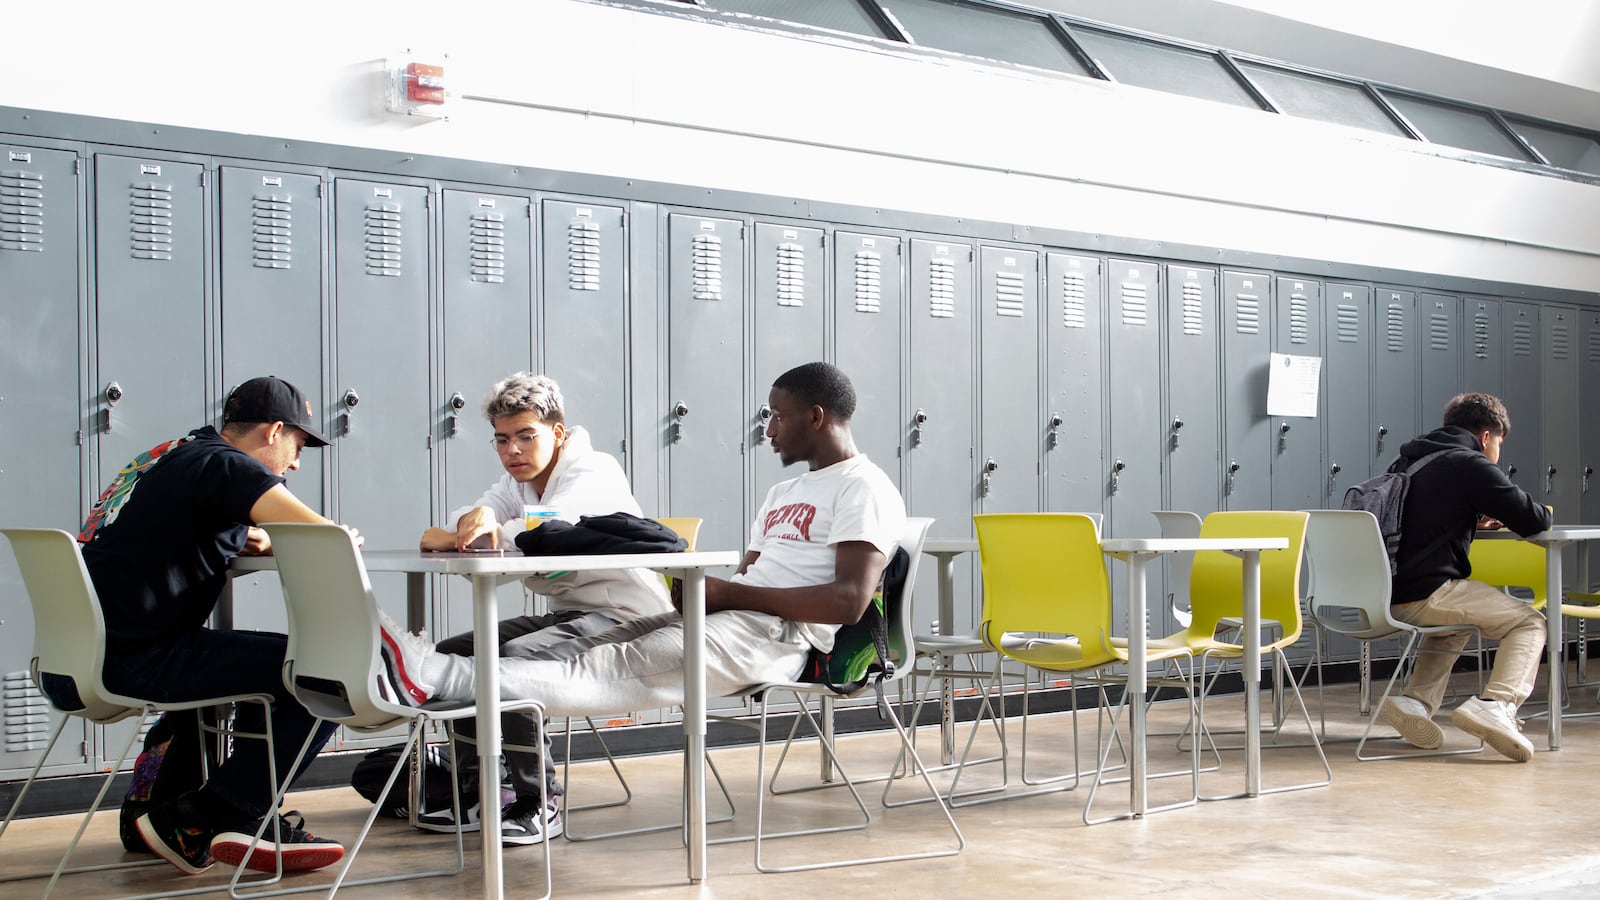 Students sit at small tables together, set against rows of grey lockers.